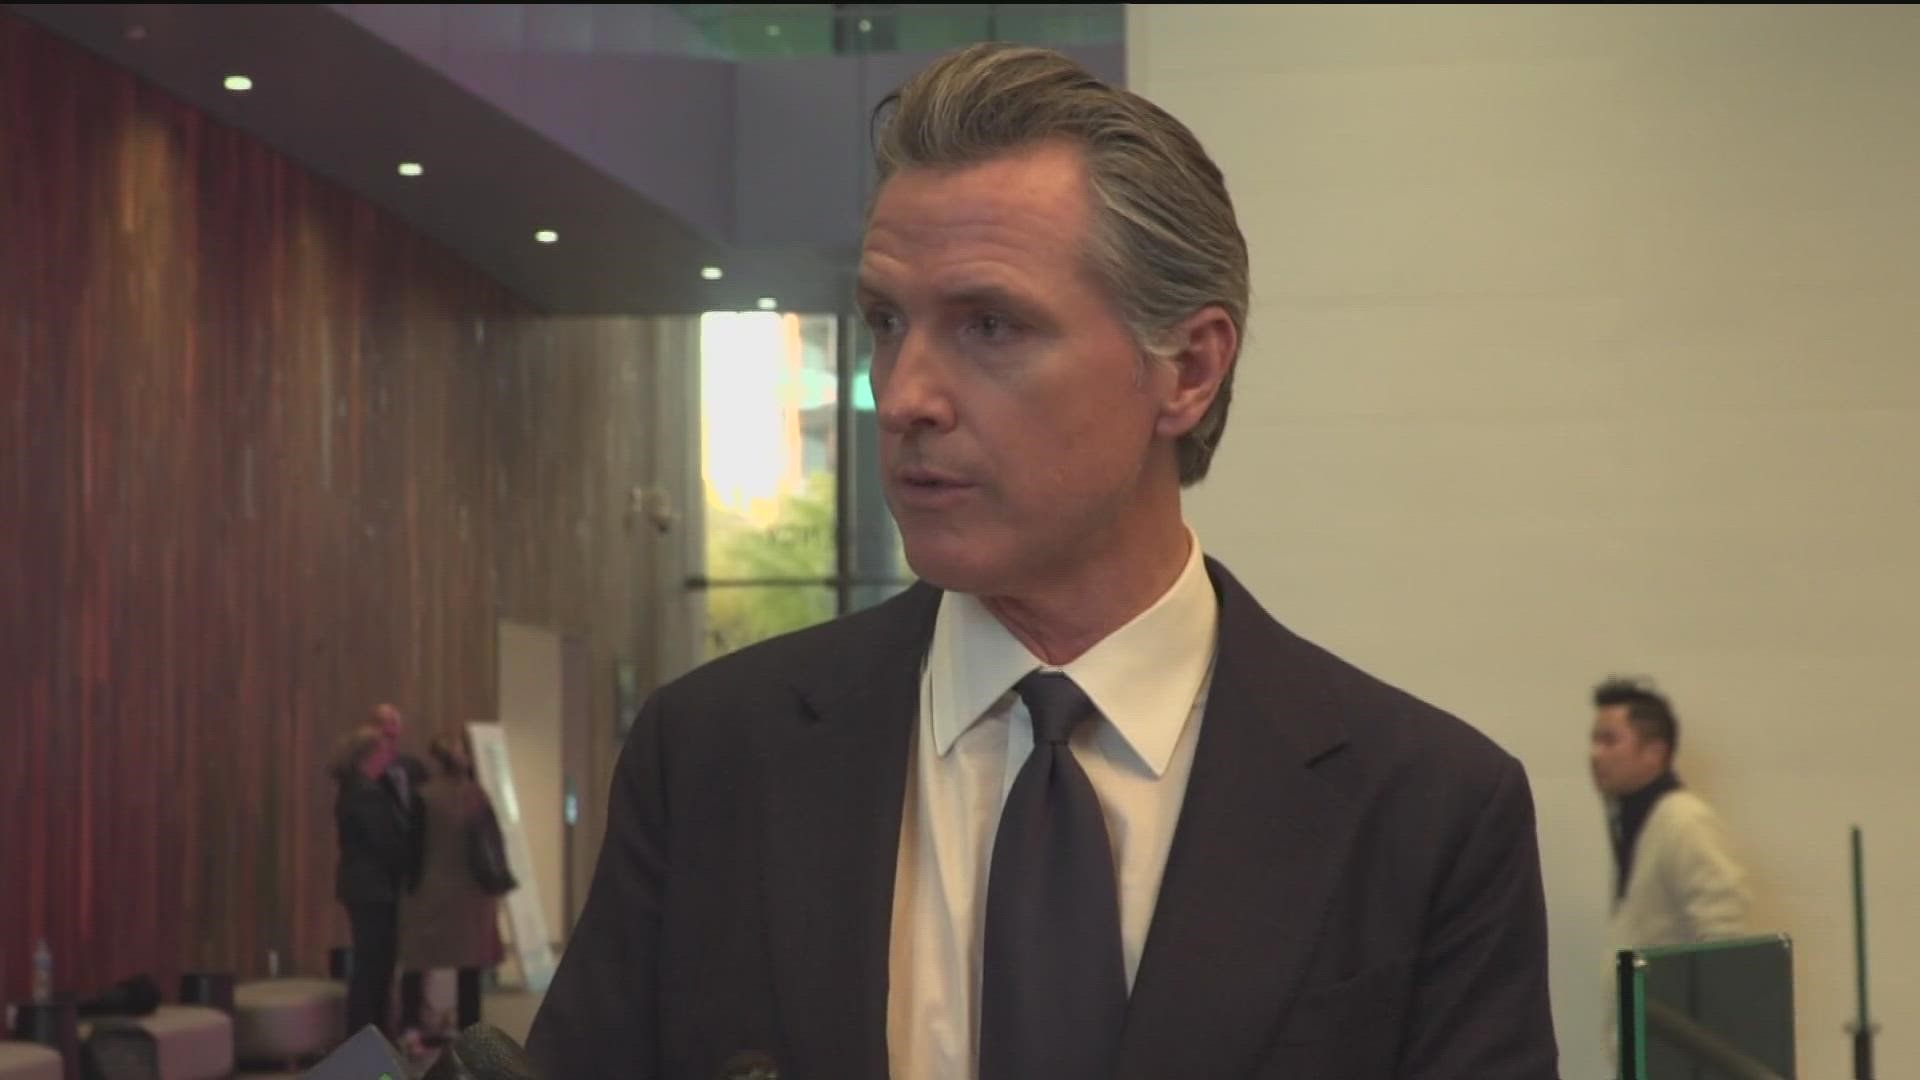 Governor Newsom said the meeting went 'beyond well', but some local leaders disagree if the funds should have ever been withheld.